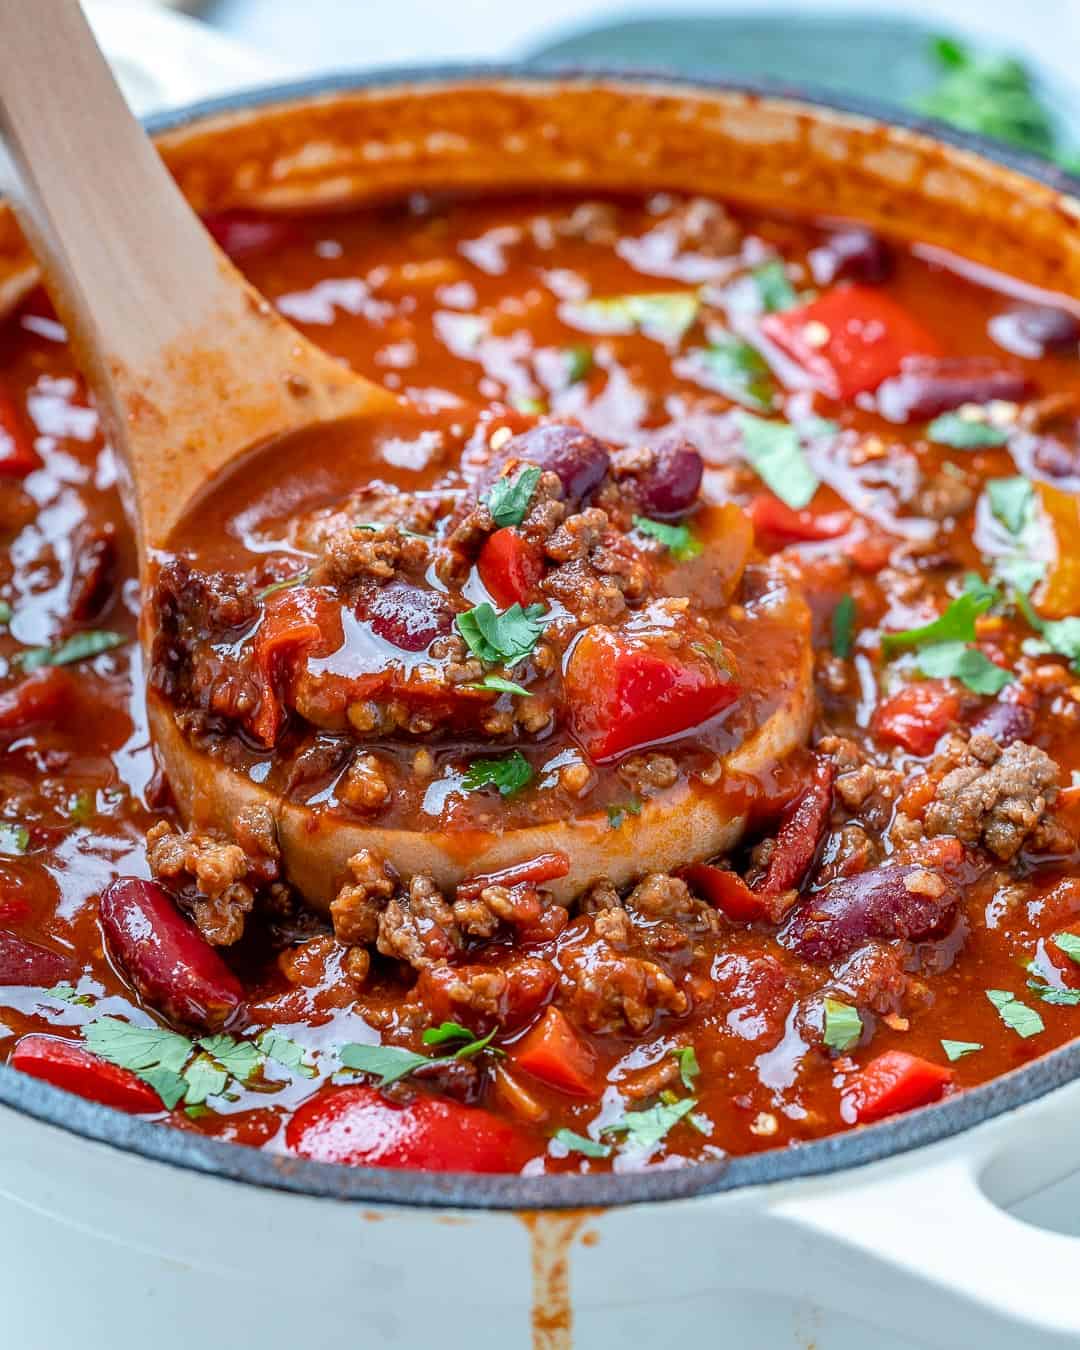 Easy Homemade Beef Chili Recipe Healthy Fitness Meals